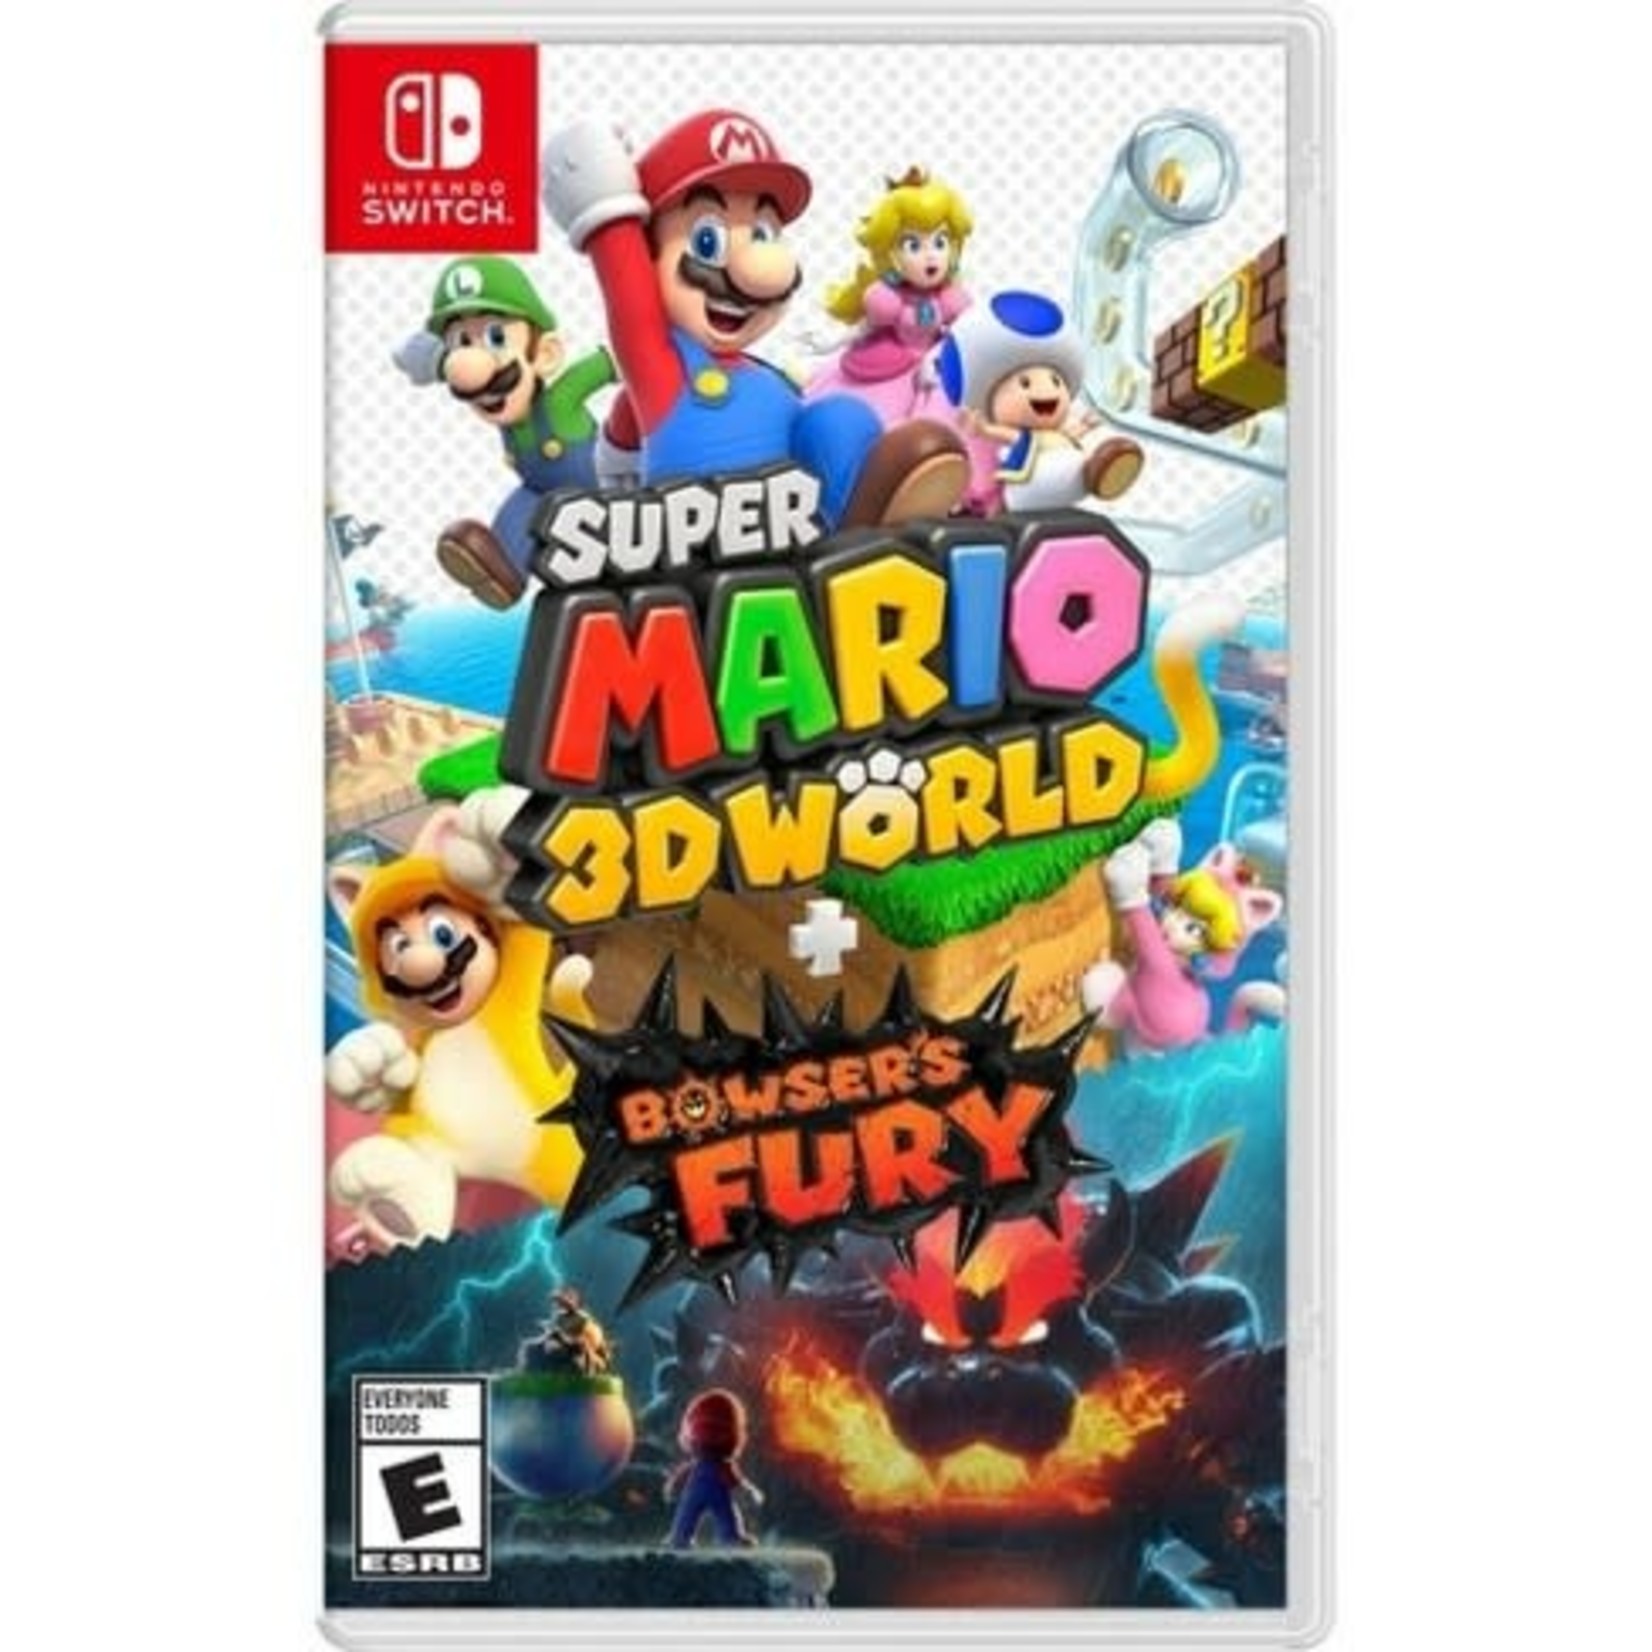 SWITCH-Super Mario 3D World + Bowser's Fury